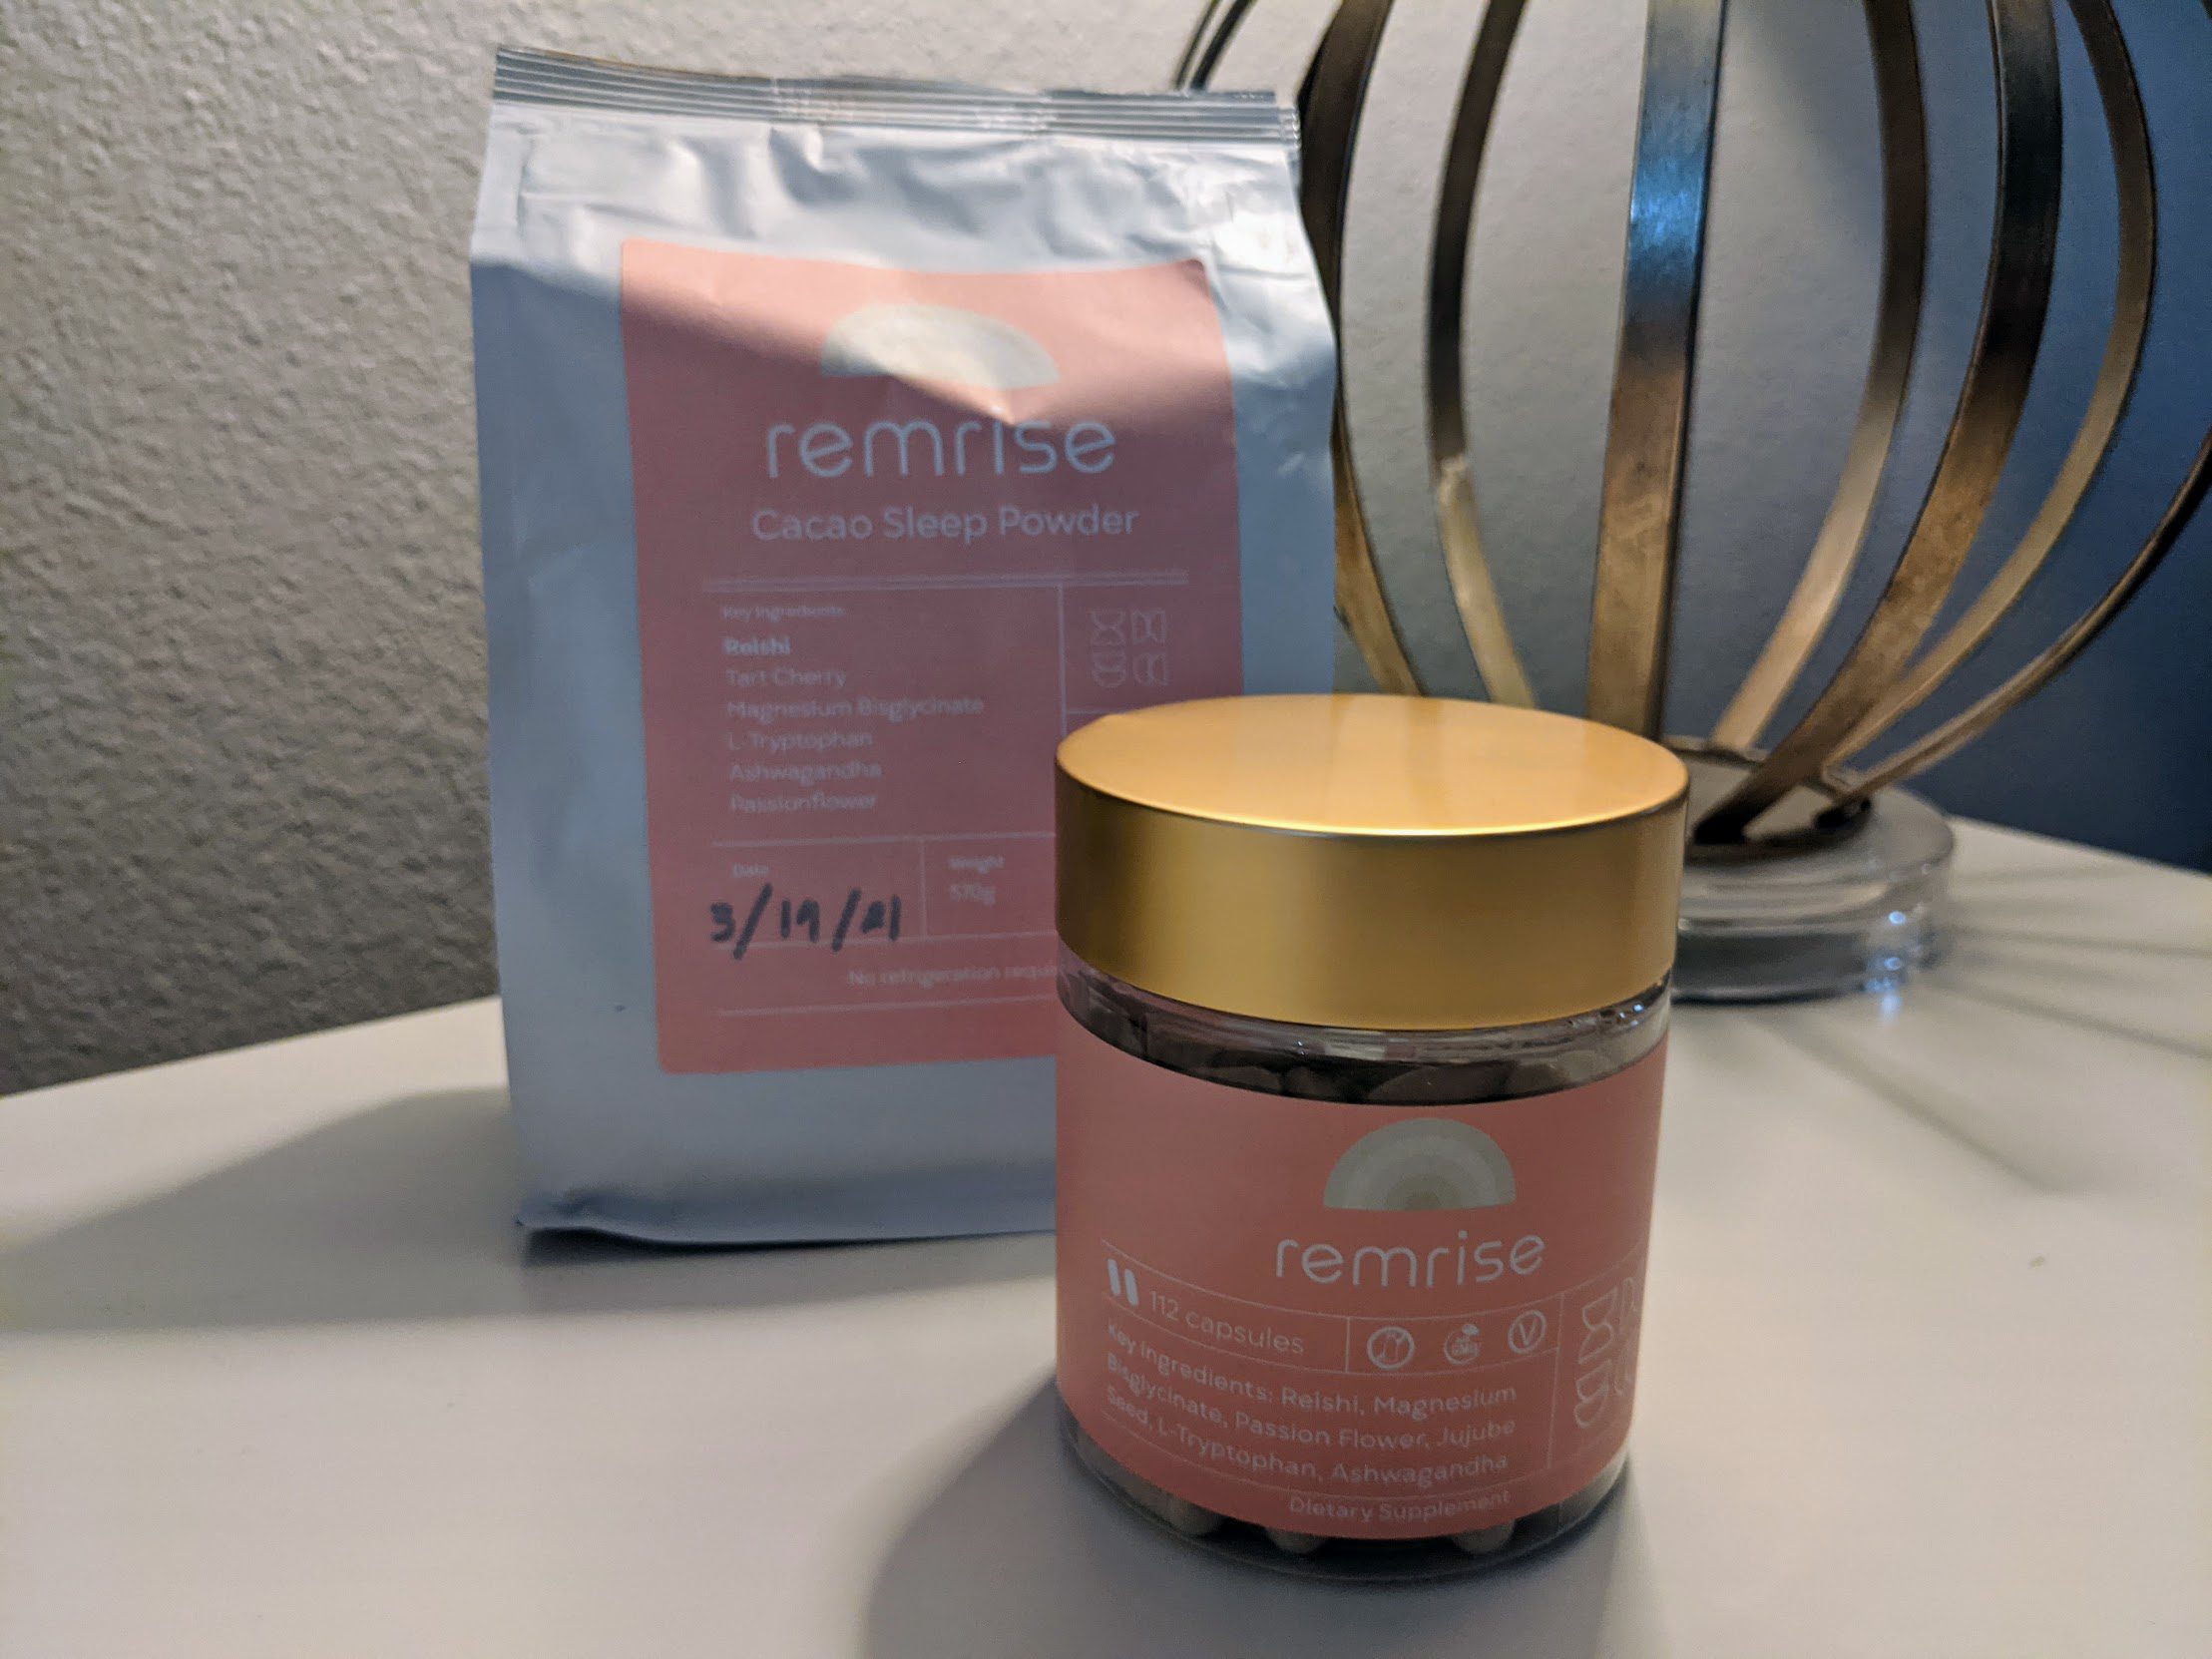 remrise review